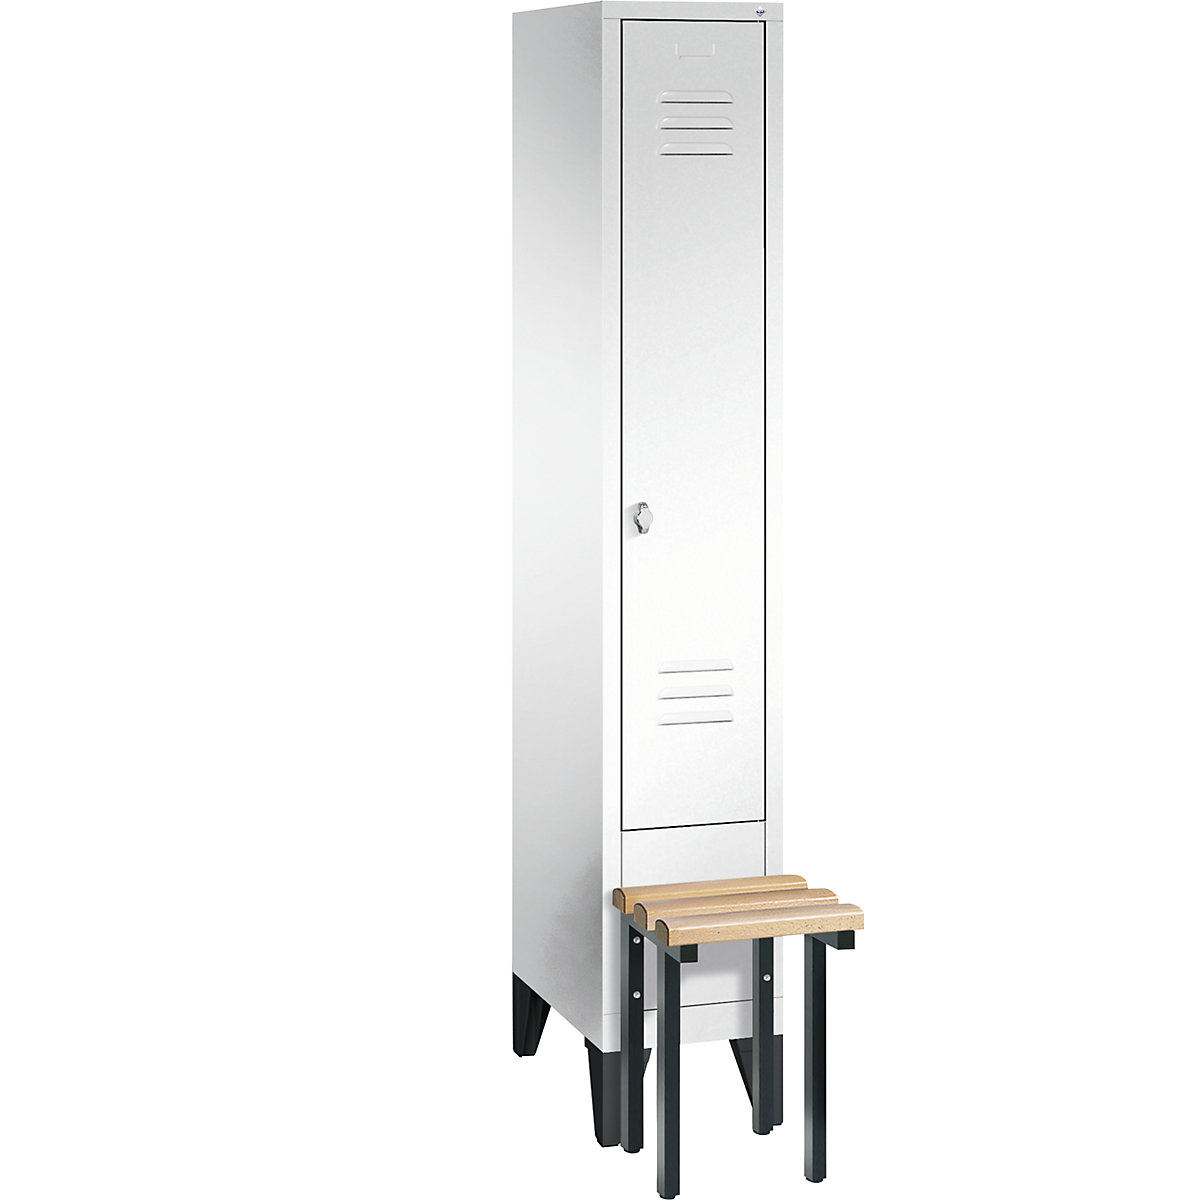 CLASSIC cloakroom locker with bench mounted in front - C+P